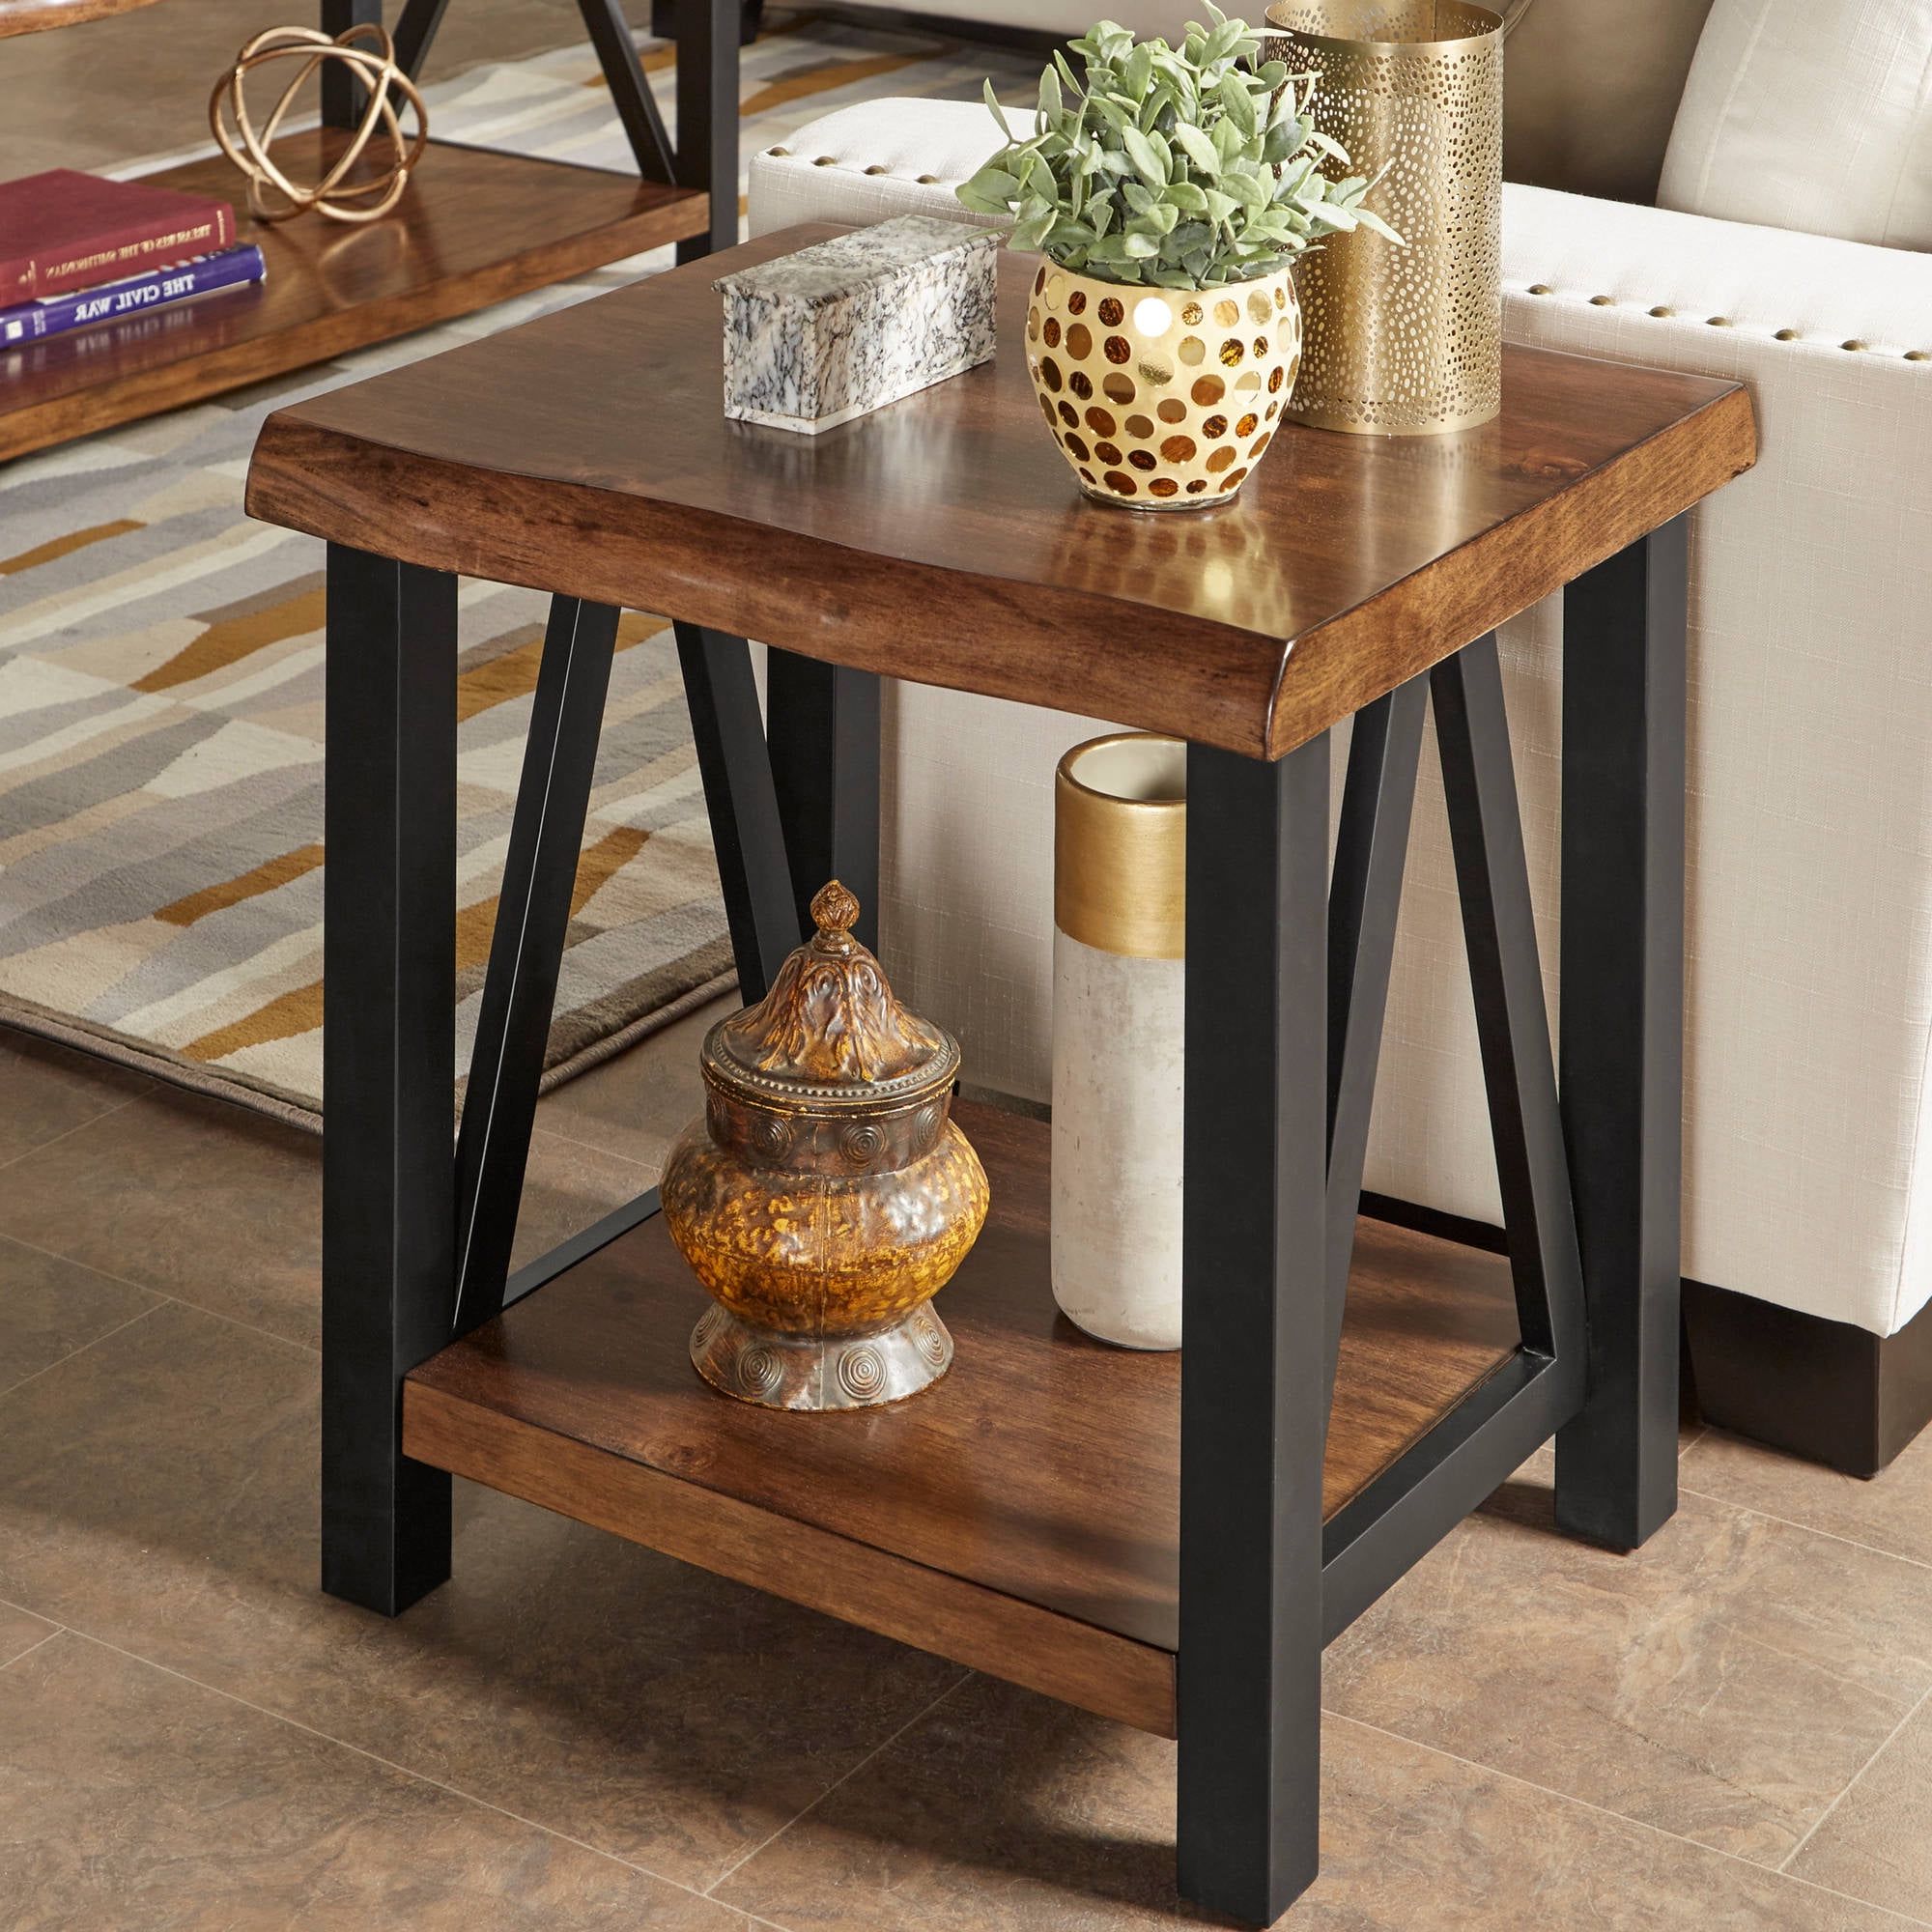 Metal Side Tables For Living Spaces Throughout Well Known Weston Home Rustic Metal Base End Table With Natural Edge Table Top And (View 2 of 15)